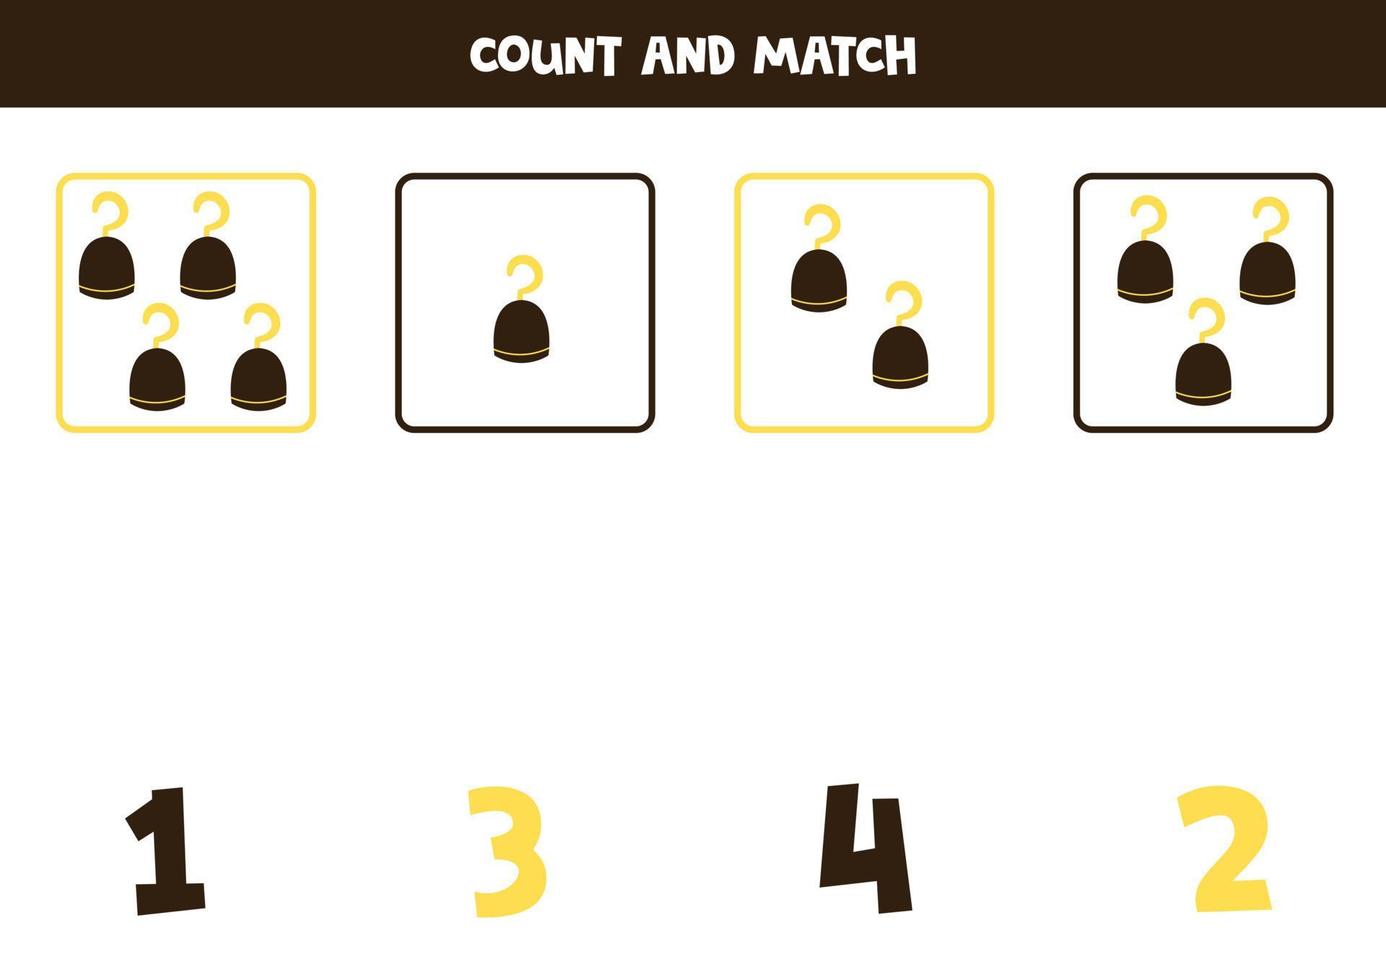 Counting game for kids. Count all pirate hooks and match with numbers. Worksheet for children. vector